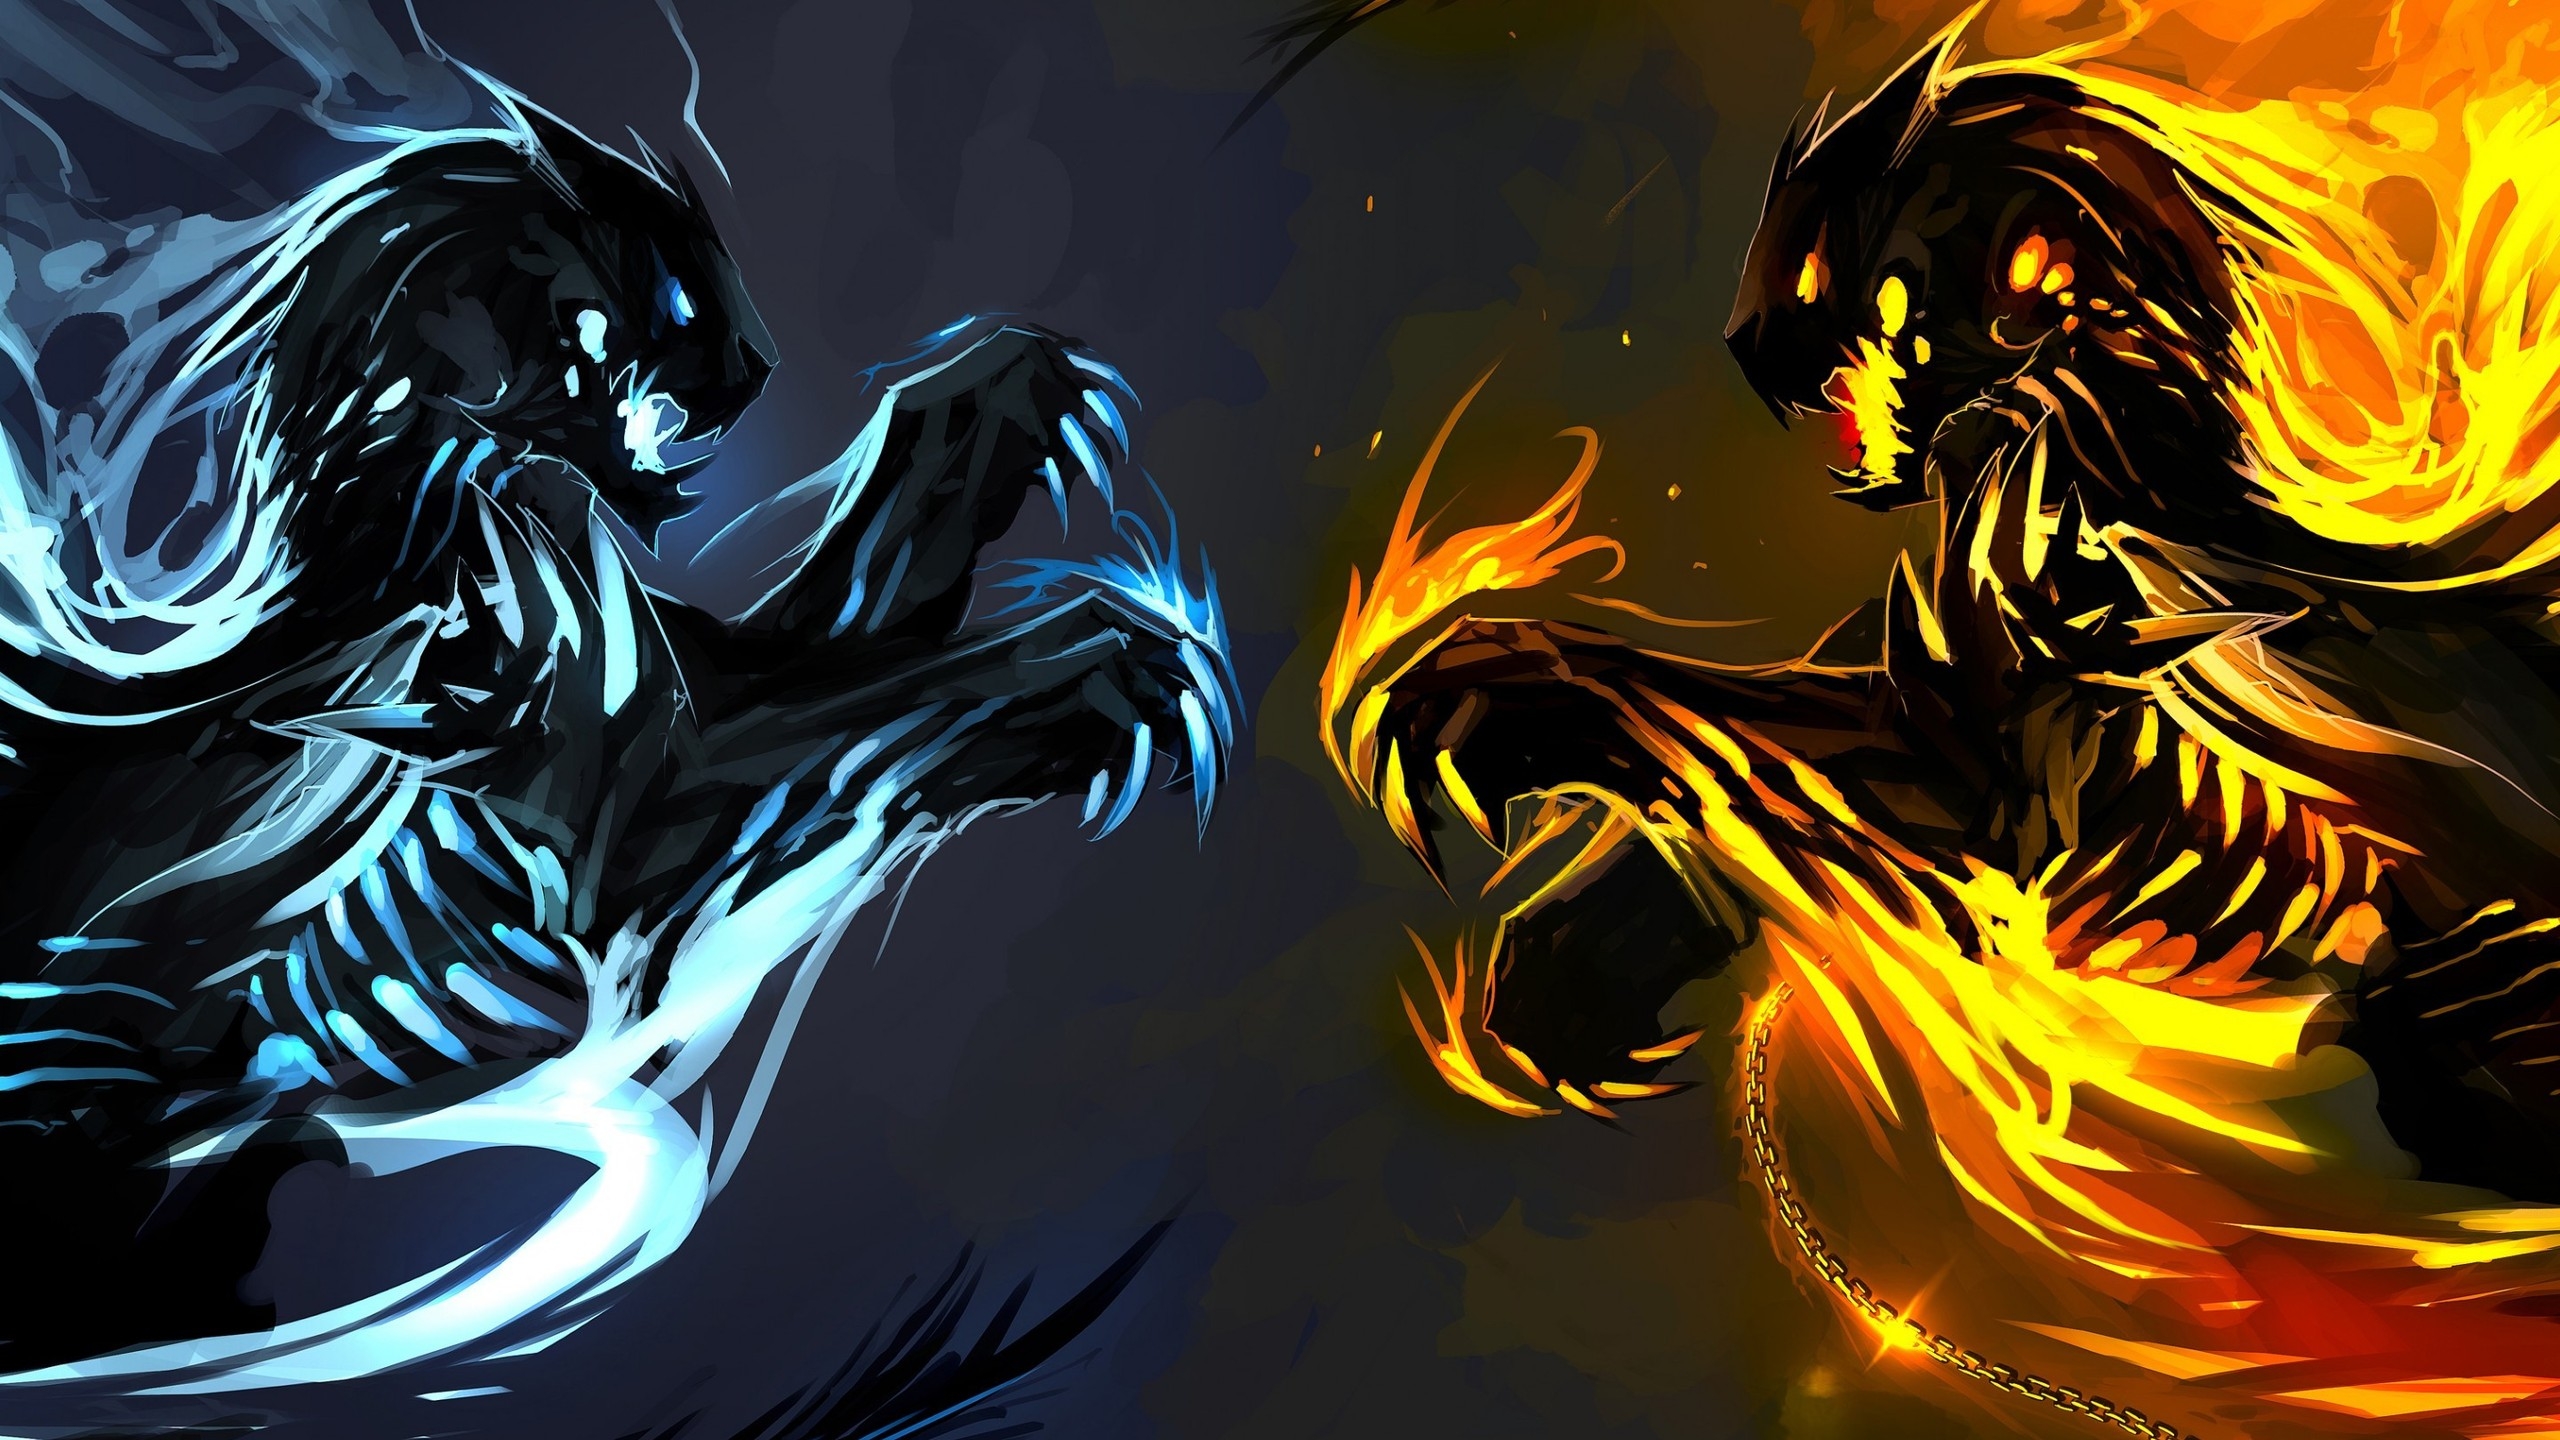 Ice and Fire Dragons for 2560x1440 HDTV resolution